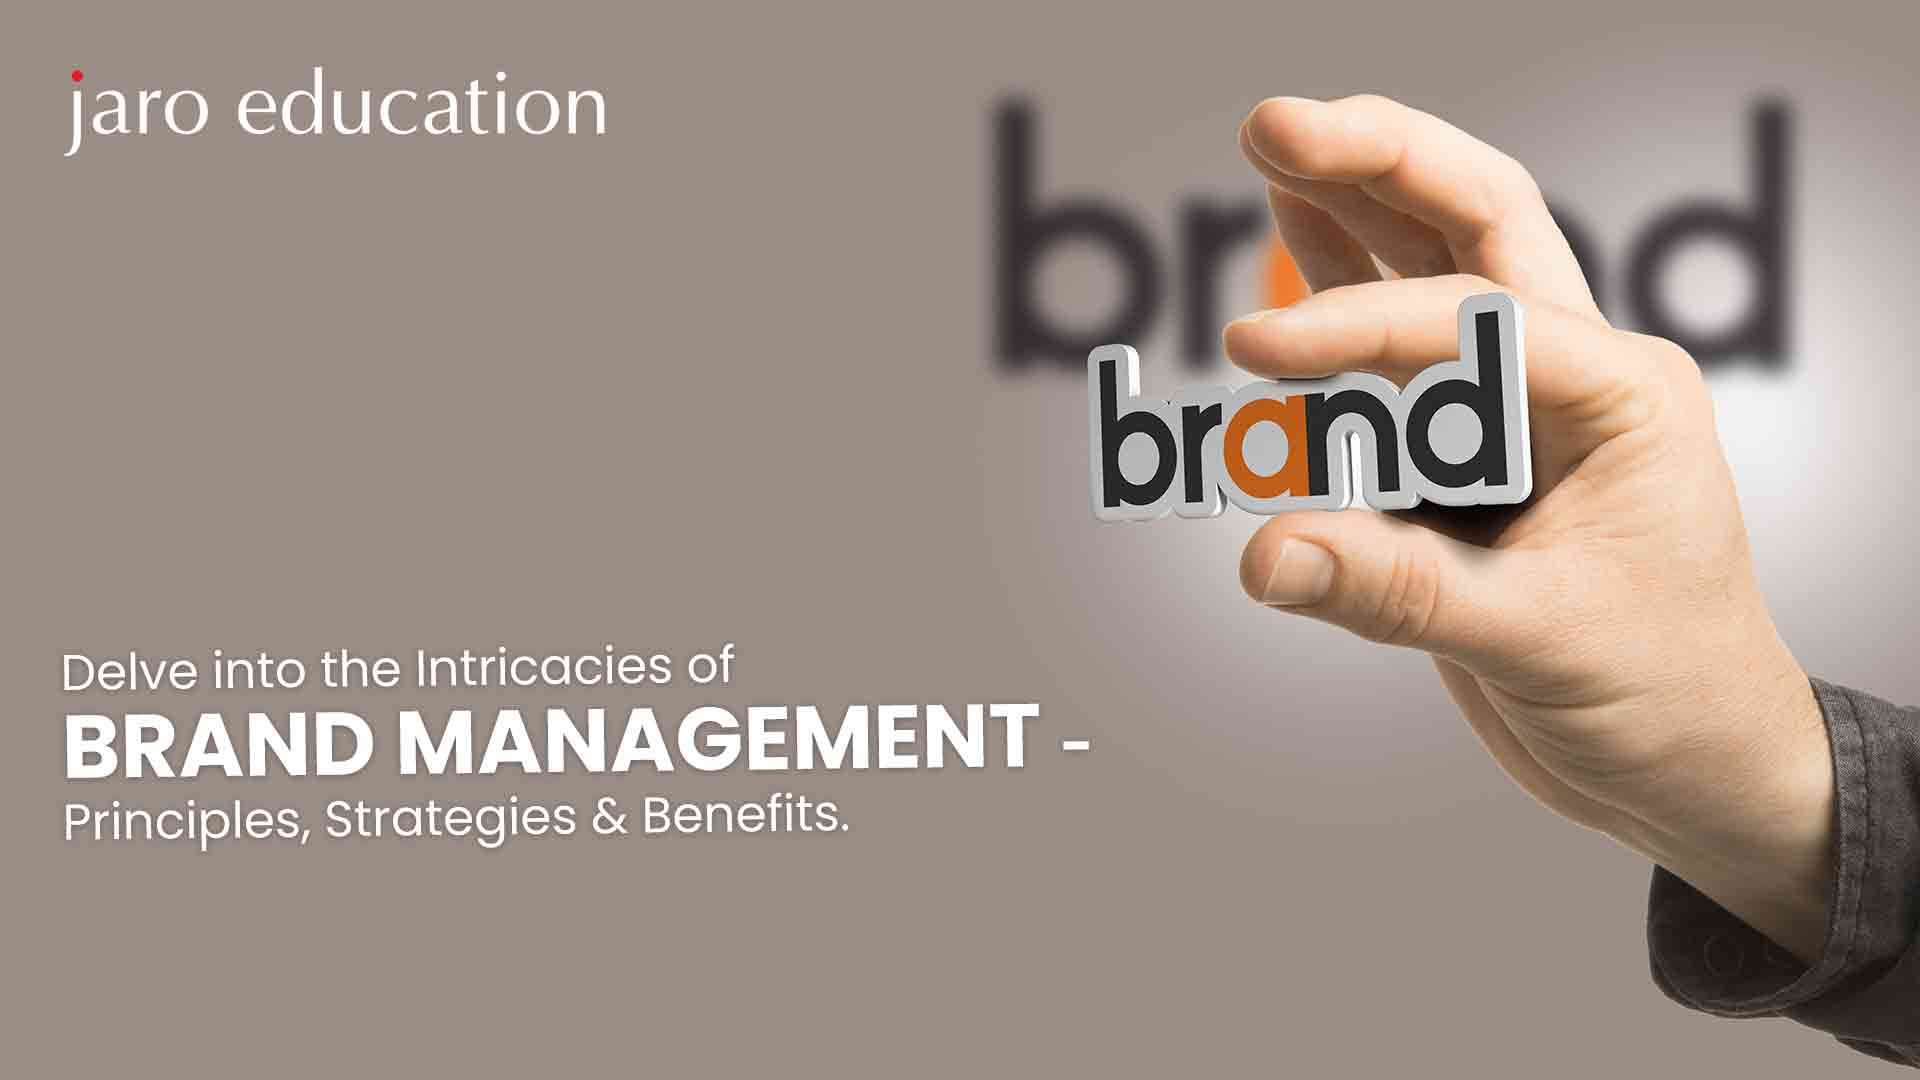 Delve Into The Intricacies Of Brand Management Principles, Strategies & Benefits